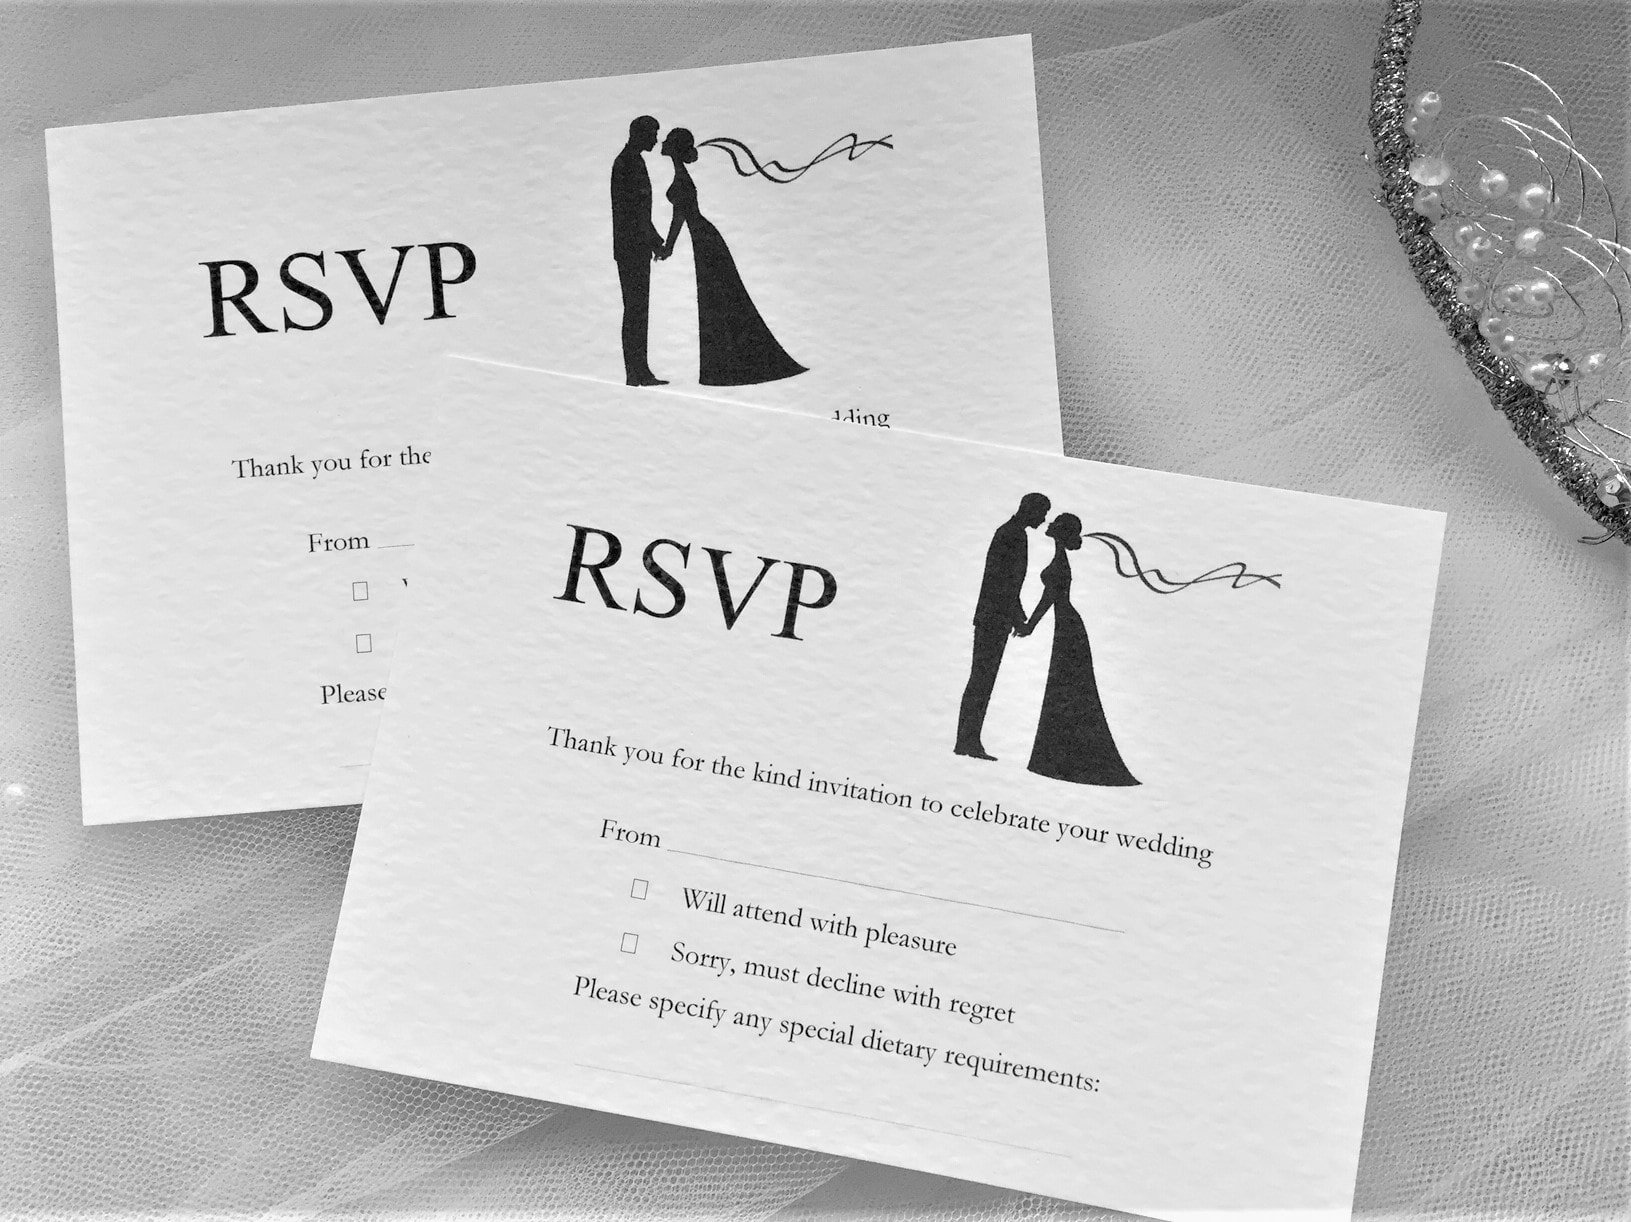 Can You Ask For RSVP On Save The Date 